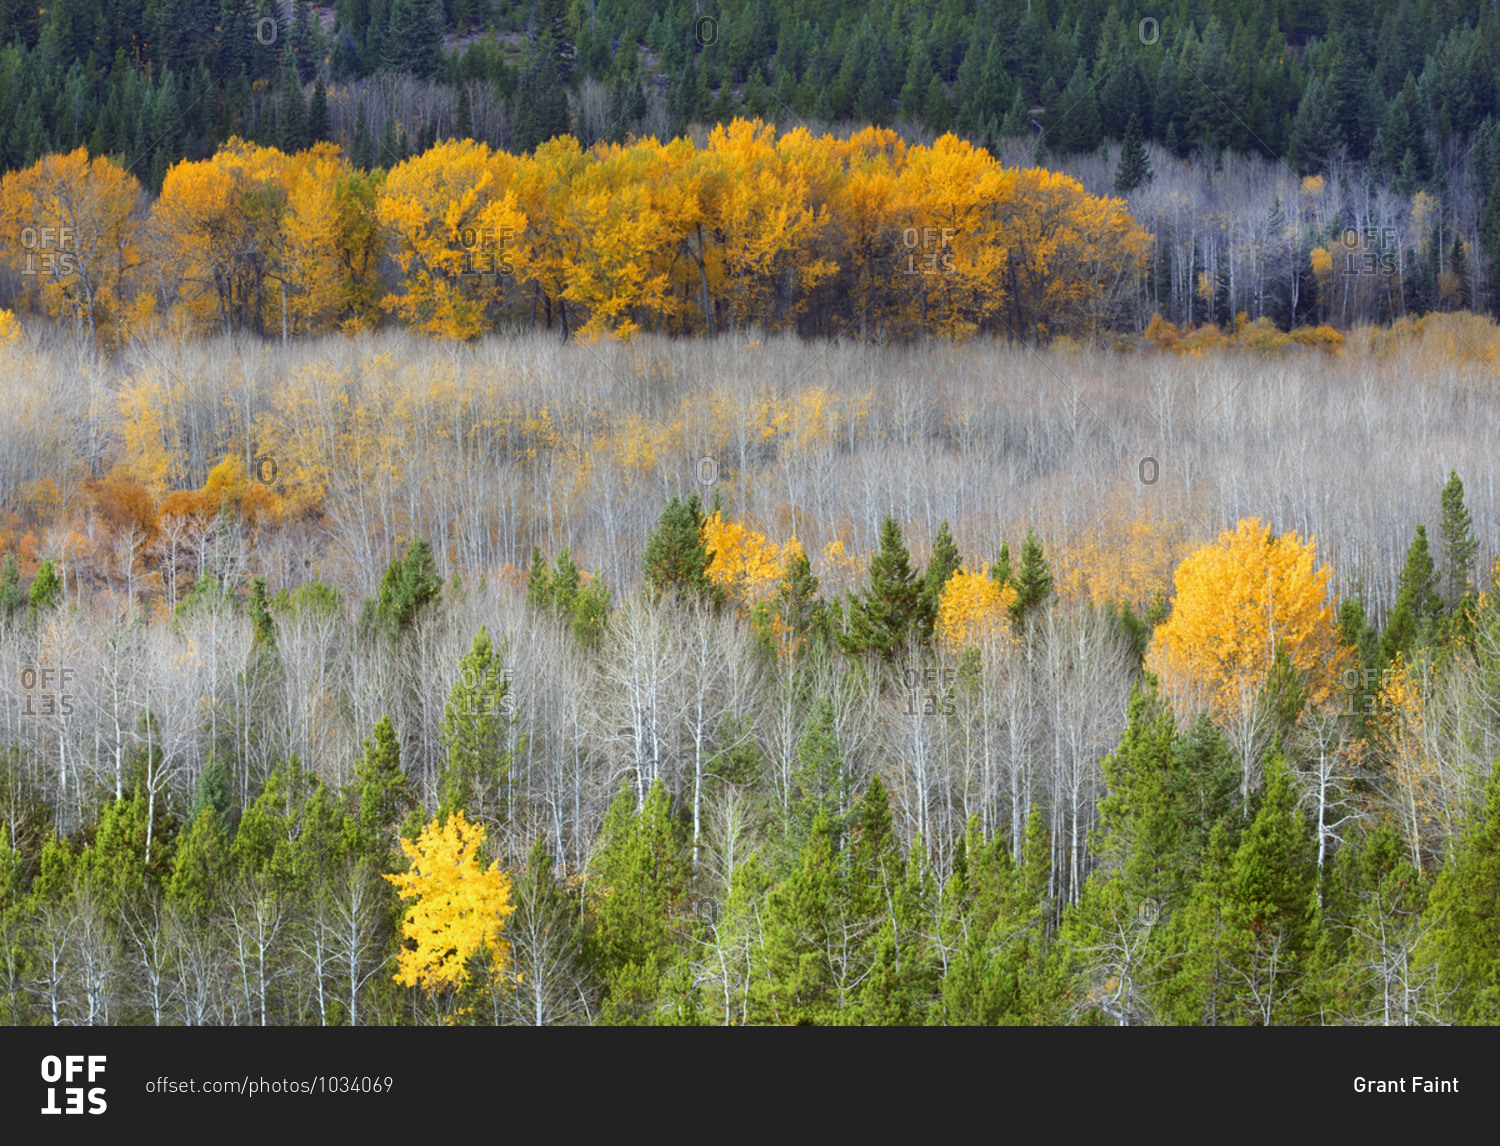 Fall colors in the Chilcotin Region of British Columbia, Canada